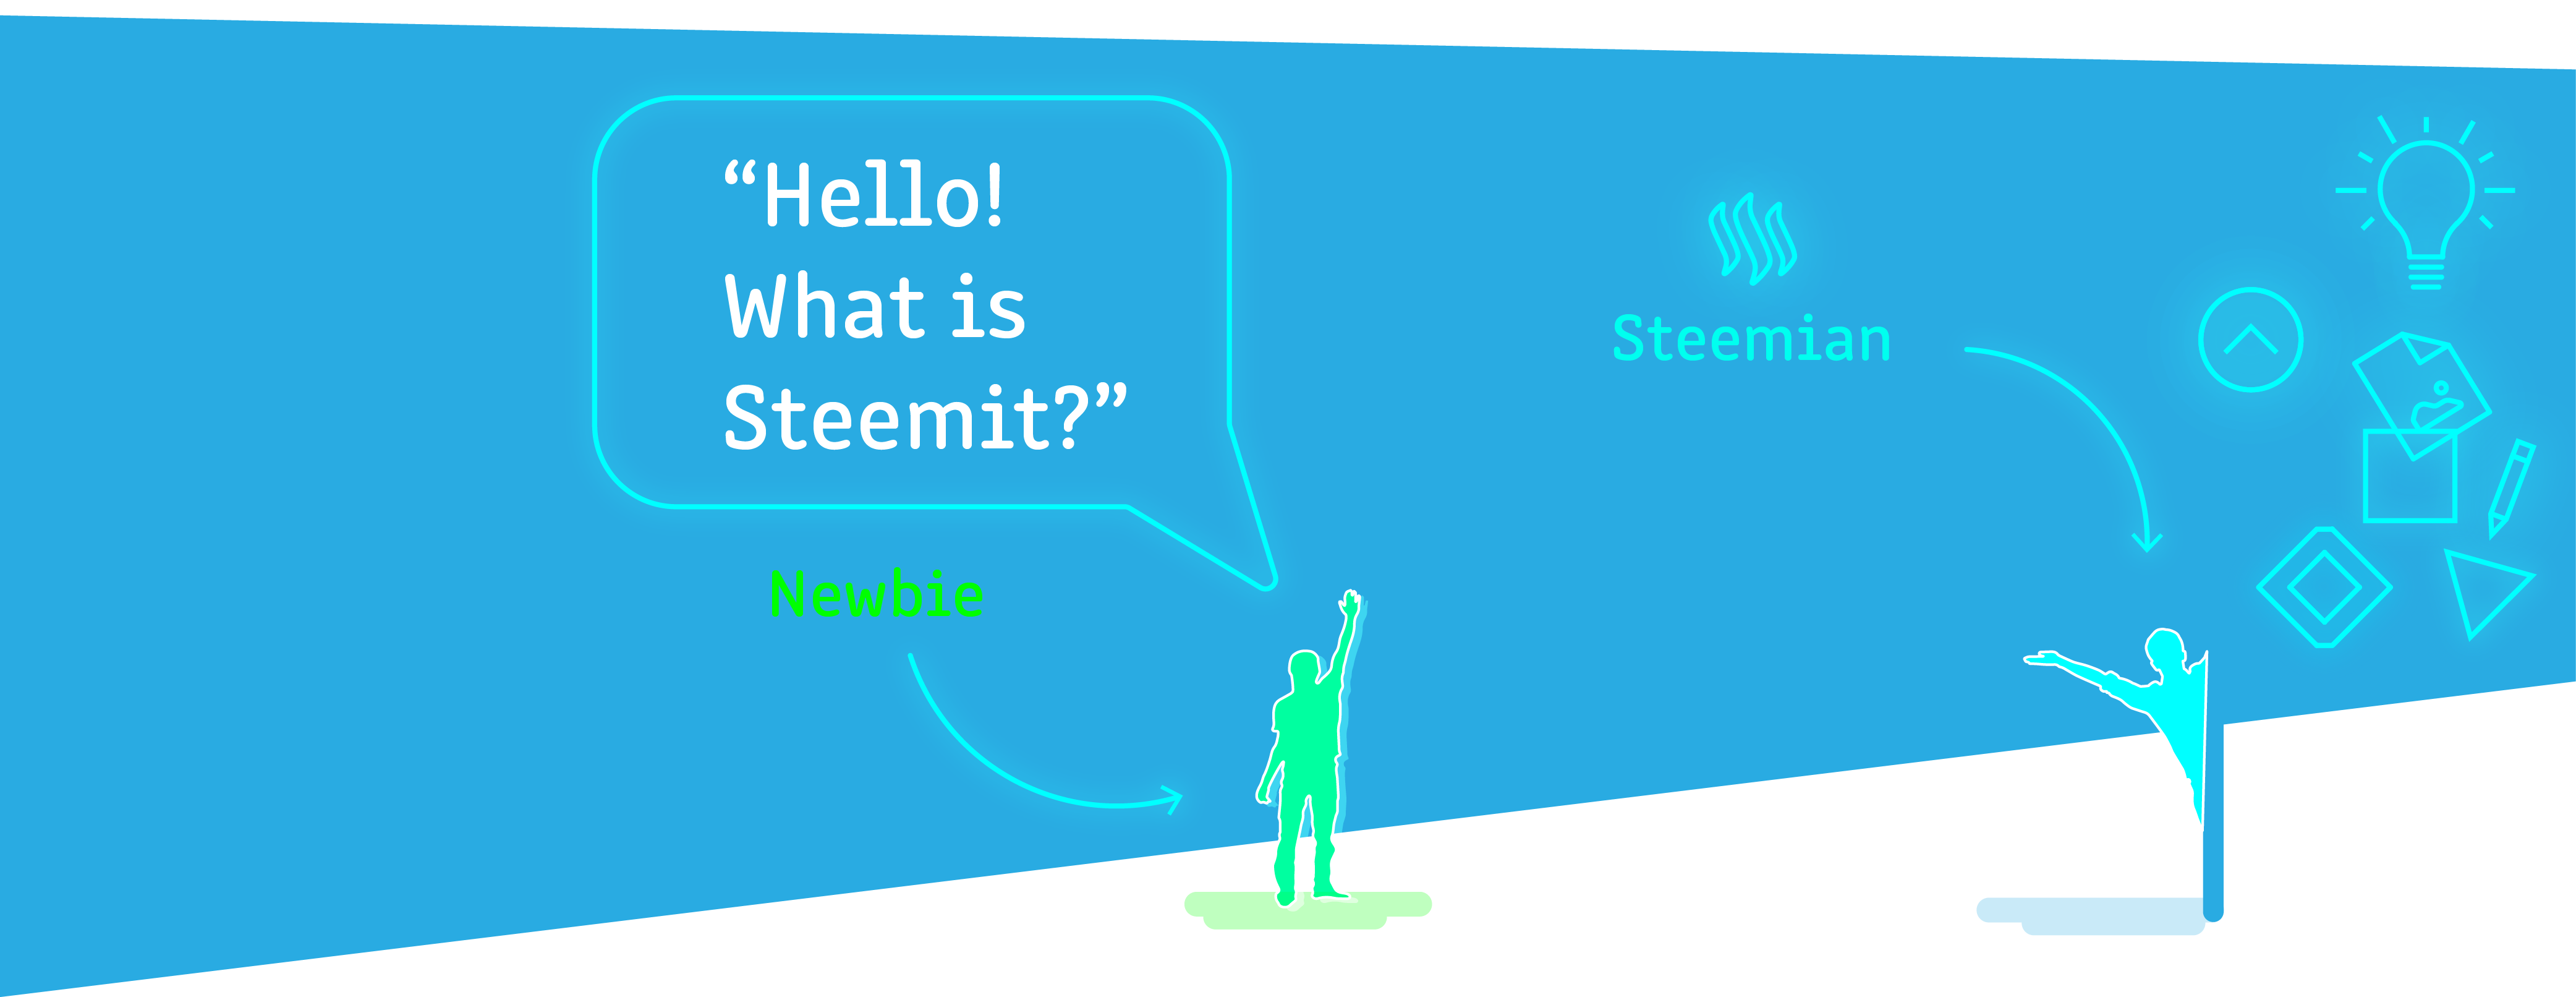 170801_Welcome-to-Steemit-01.png